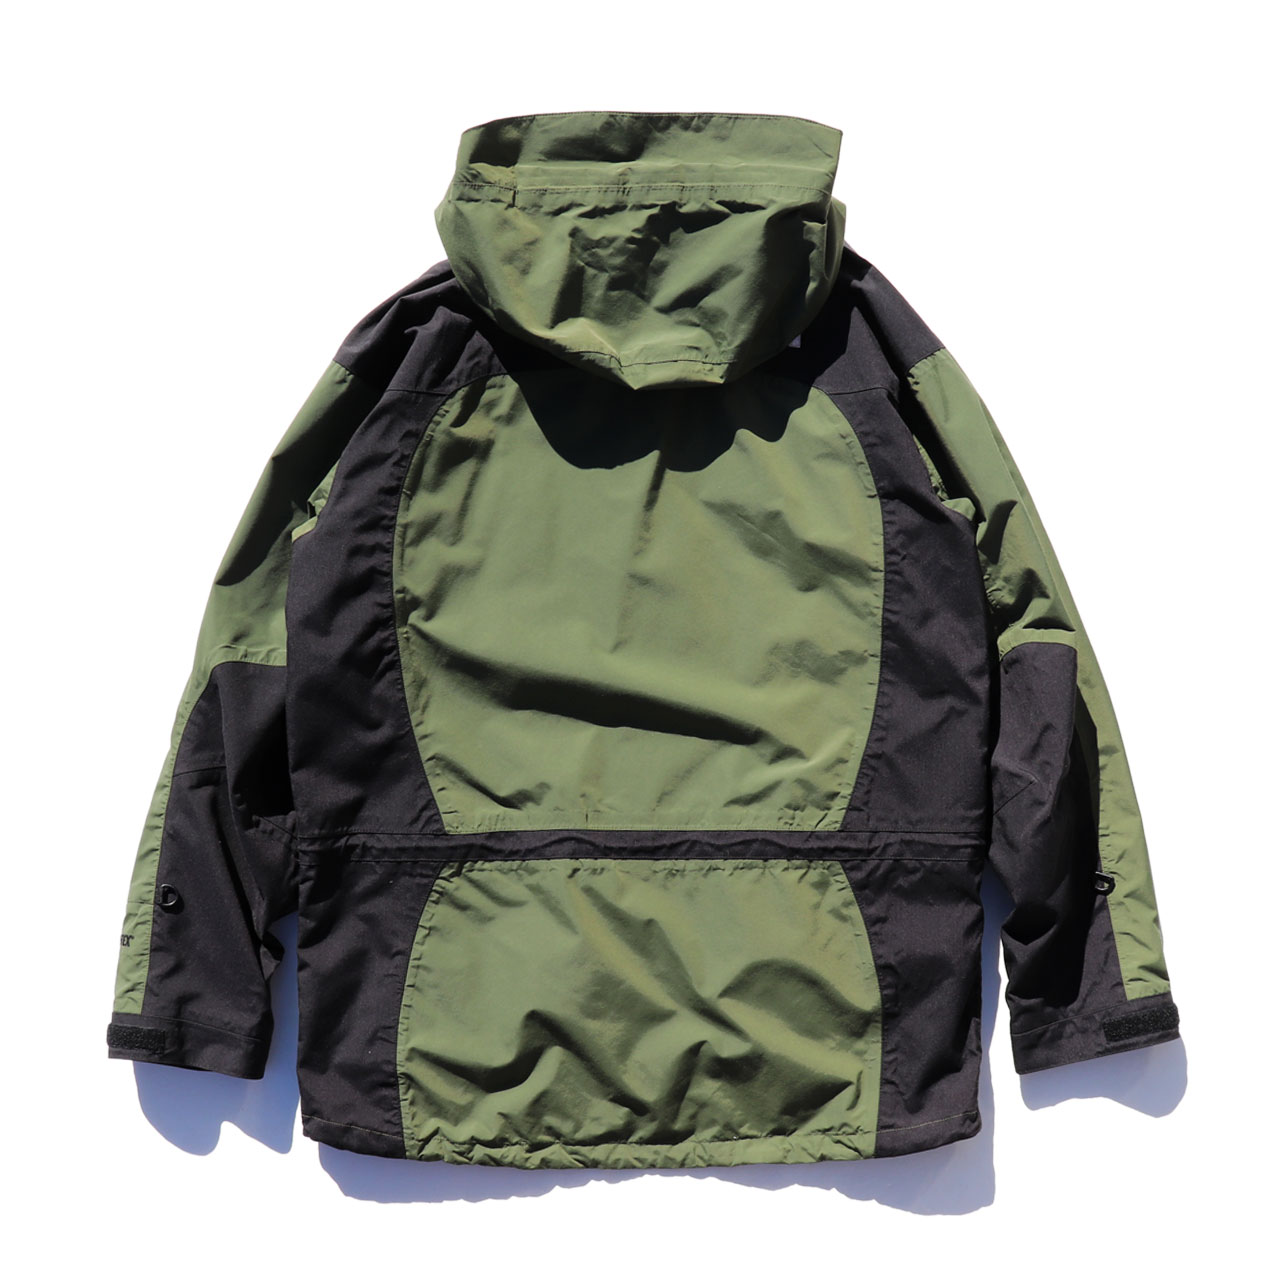 POST JUNK / 90's THE NORTH FACE GORE-TEX モスグリーン マウンテン 